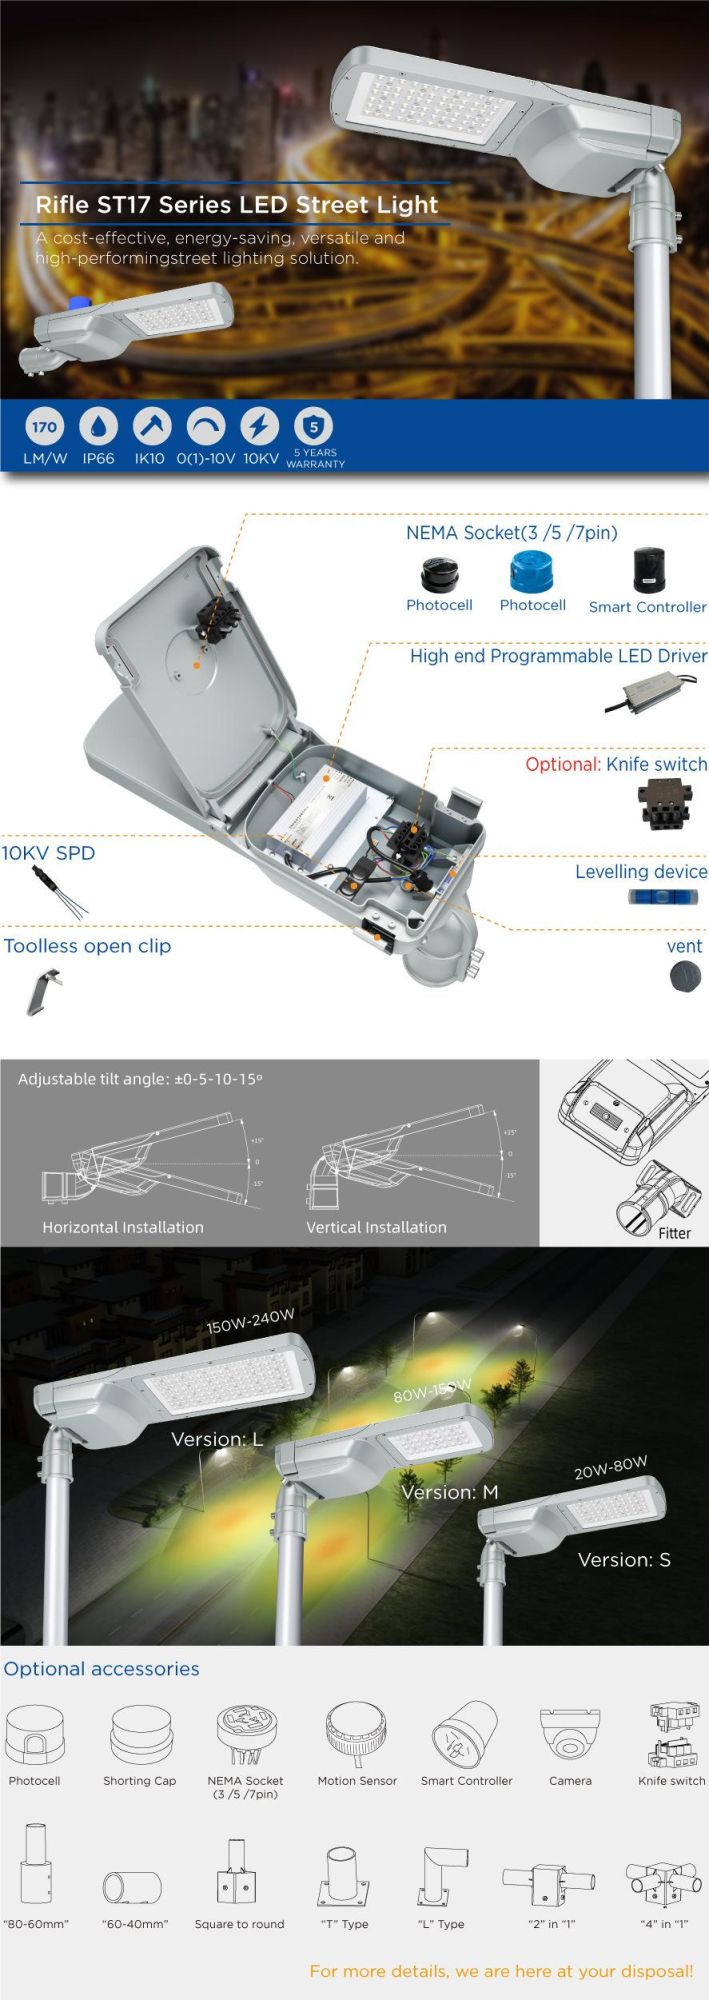 IP66 120W LED Street Light with Photocell and SPD